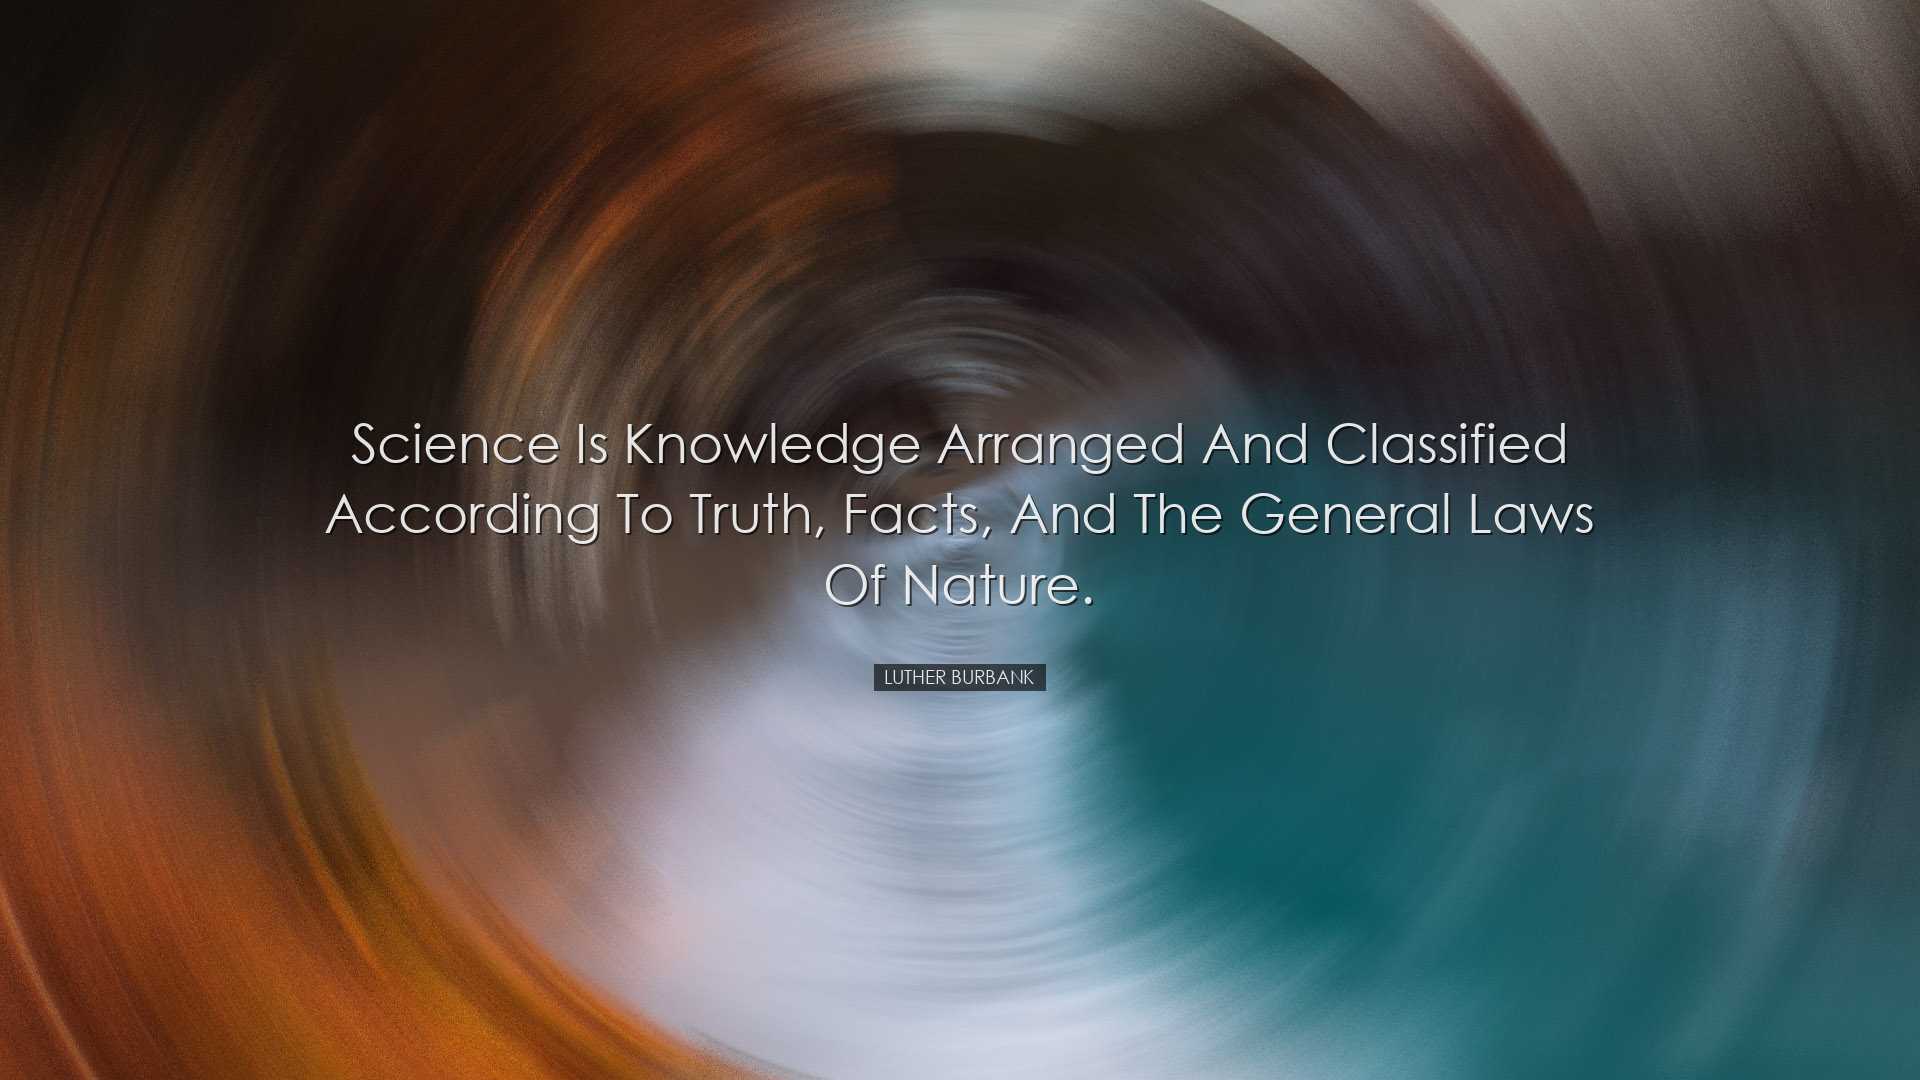 Science is knowledge arranged and classified according to truth, f